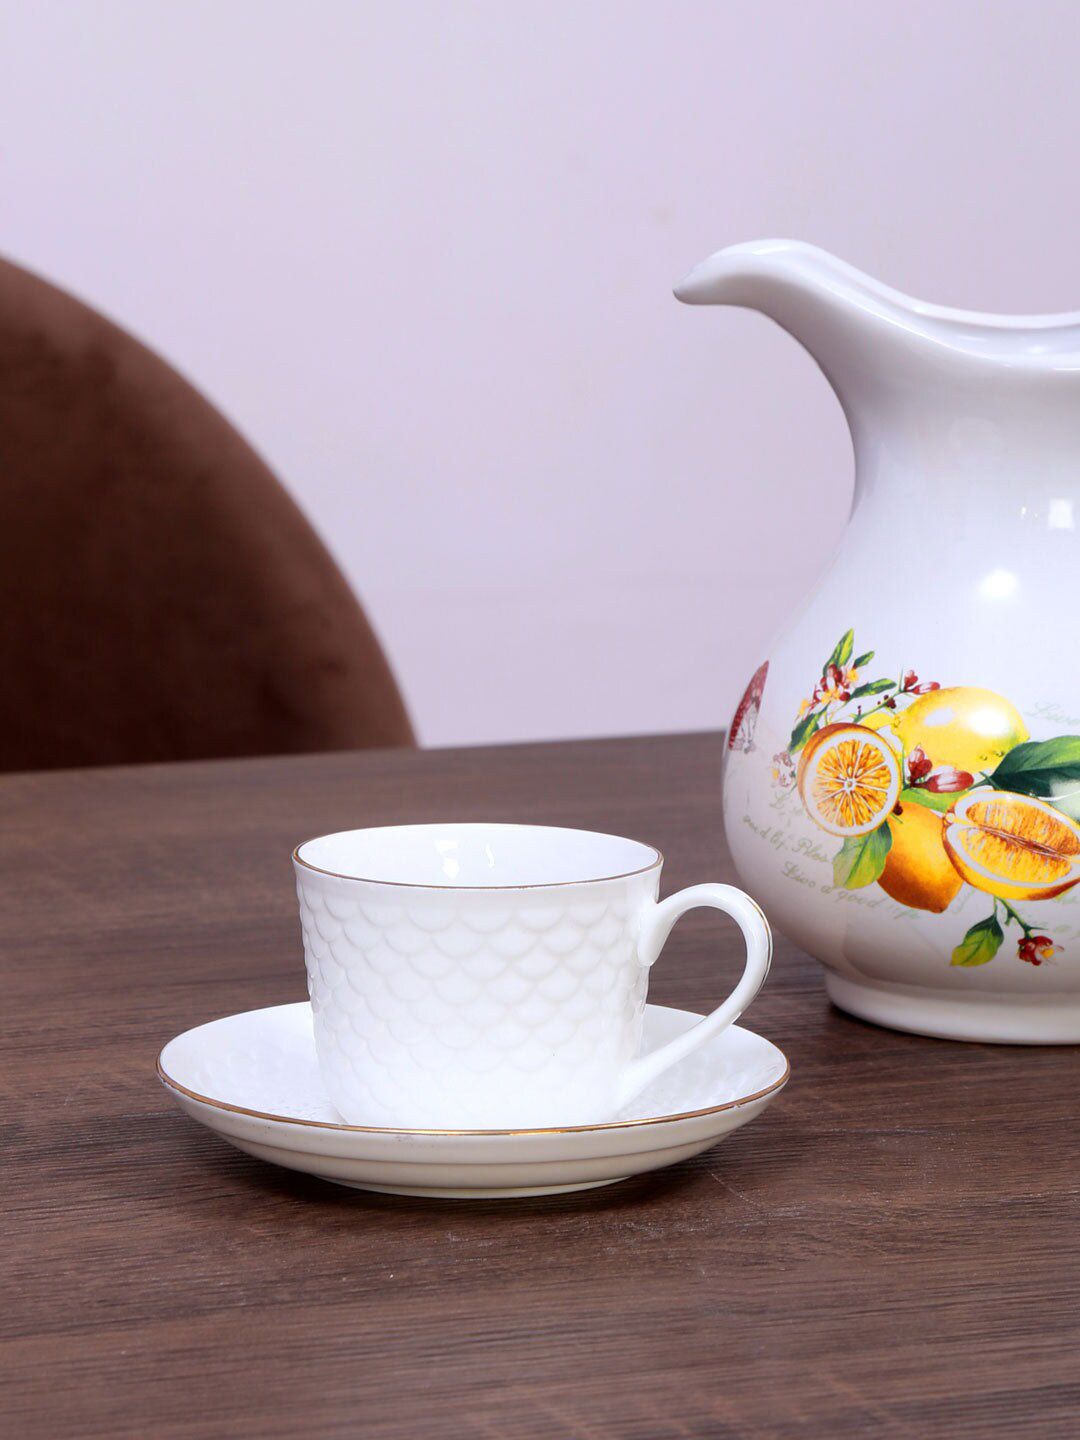 Athome by Nilkamal White Printed Ceramic Matte Cups Set of 12 Cups and Saucer Price in India